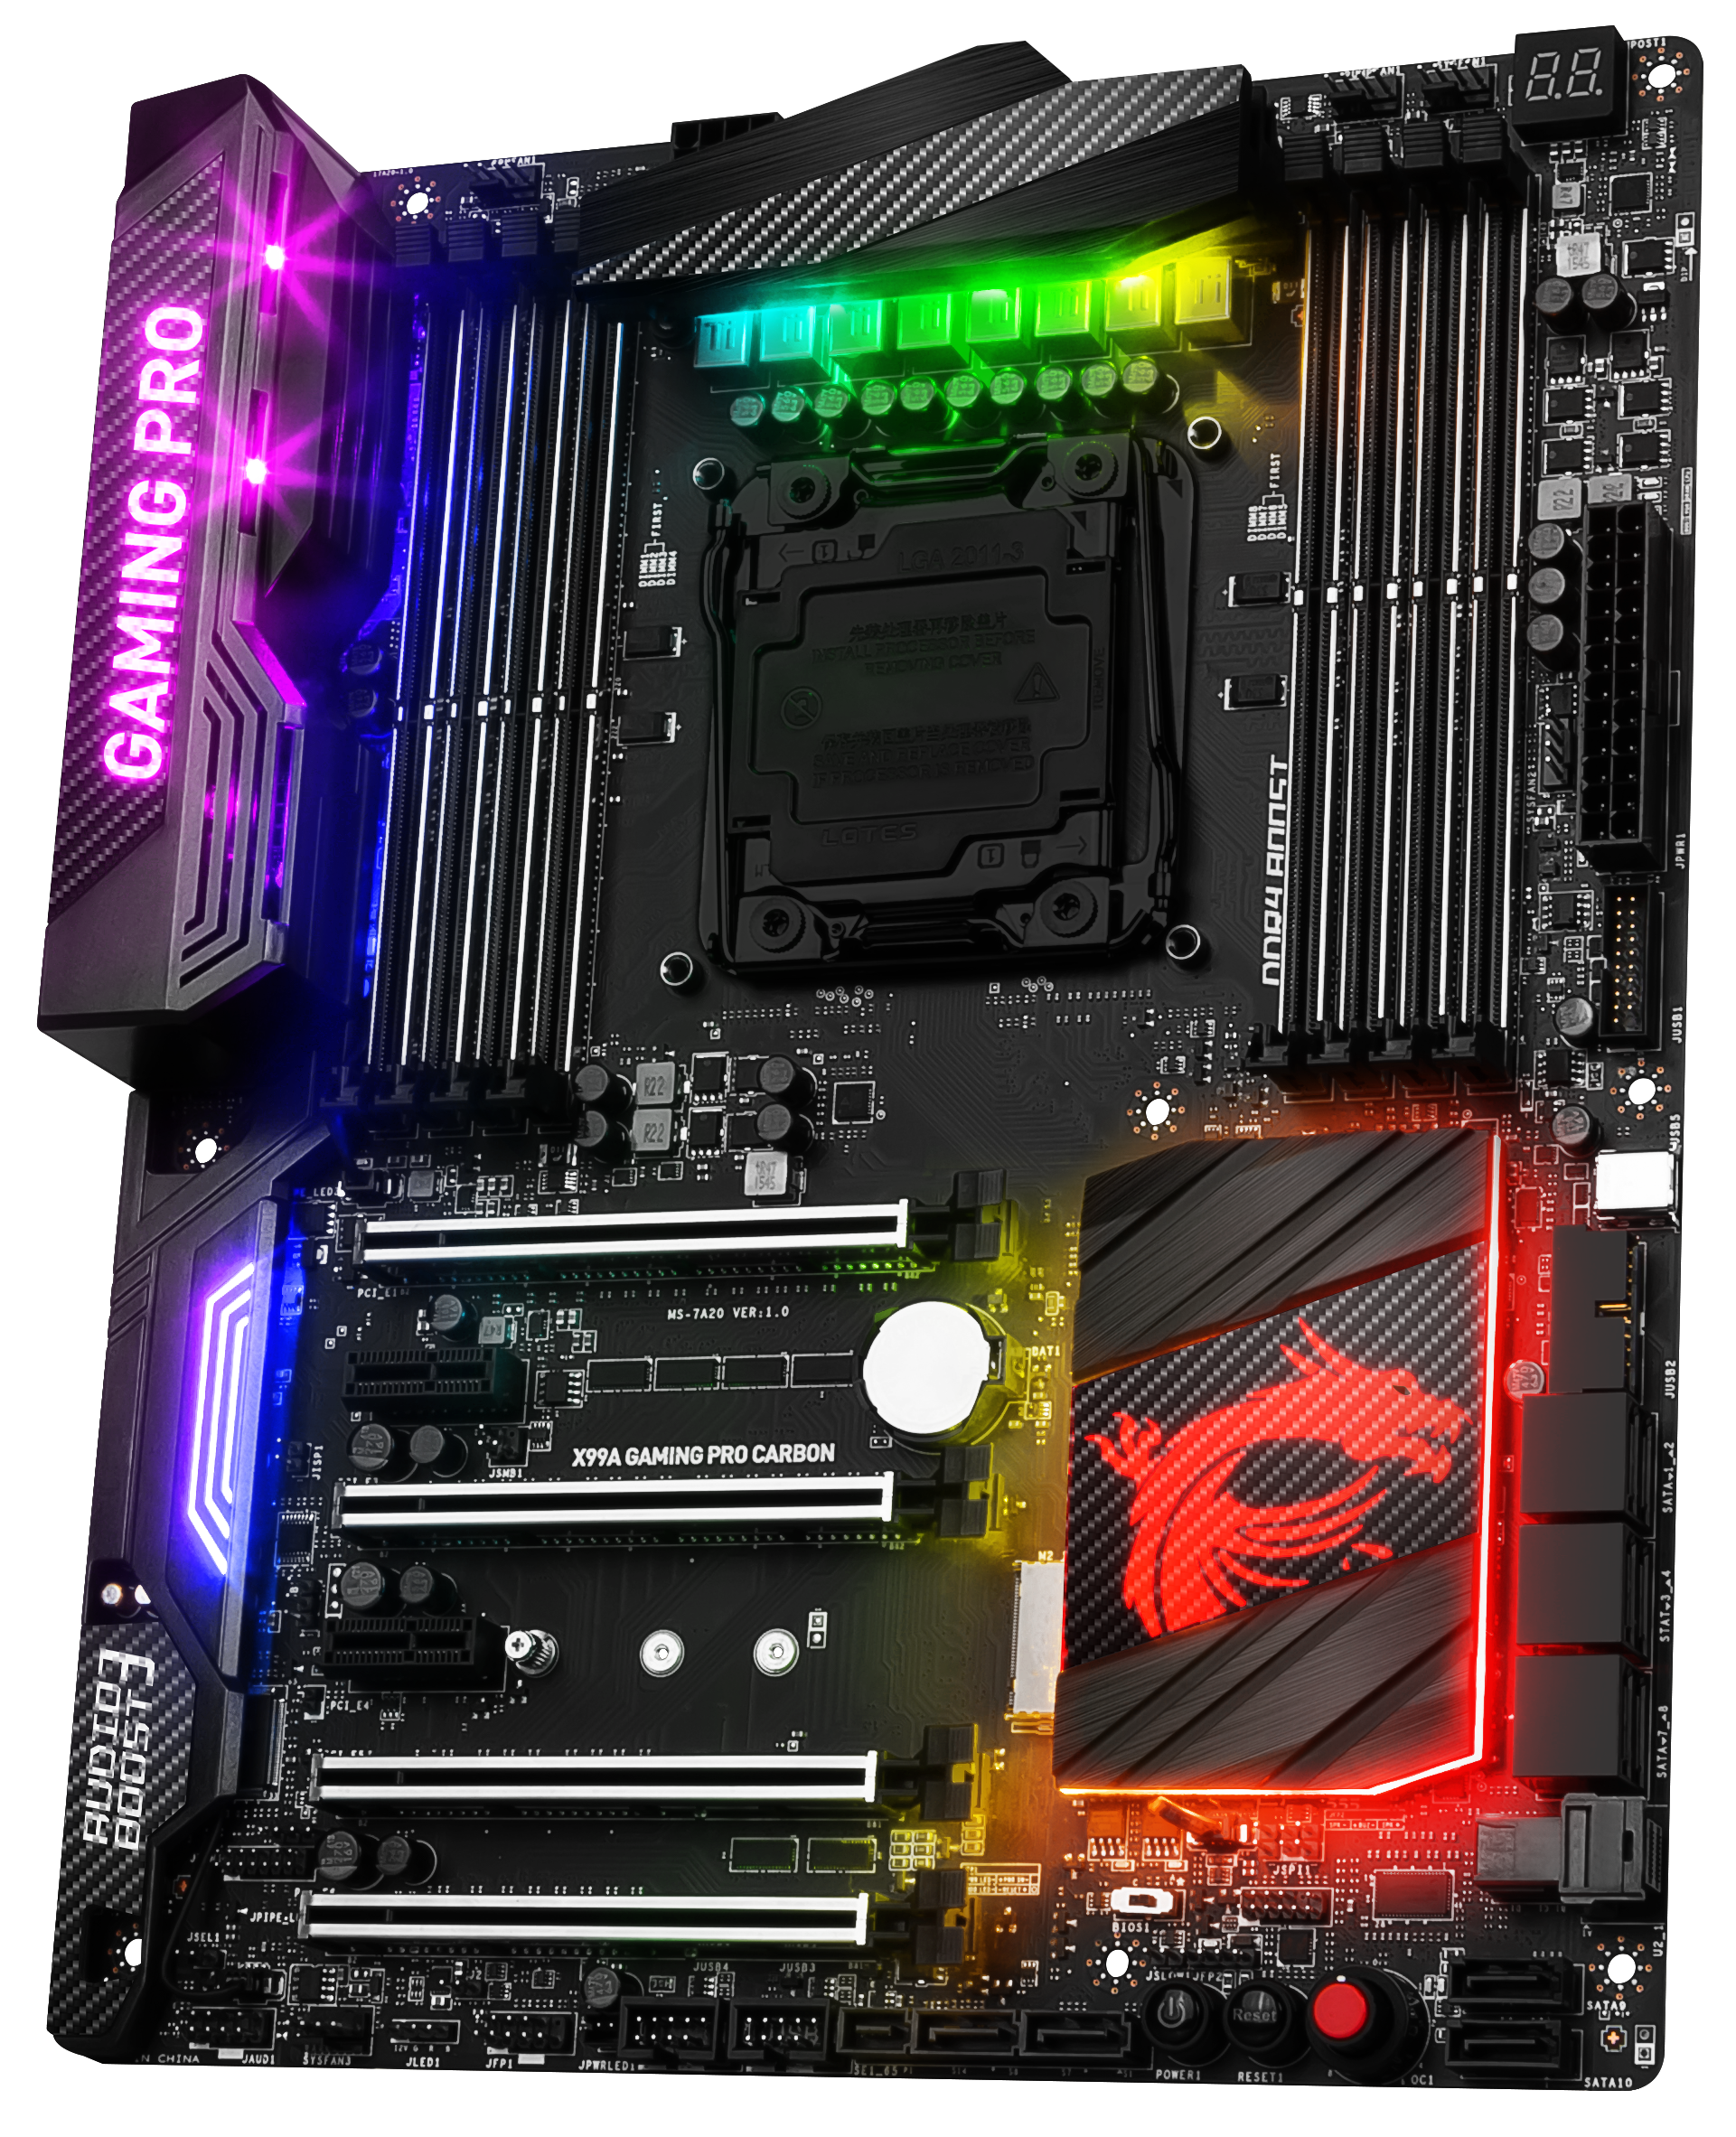 MSI X99A Gaming Pro Carbon Conclusion - The MSI X99A Gaming Pro